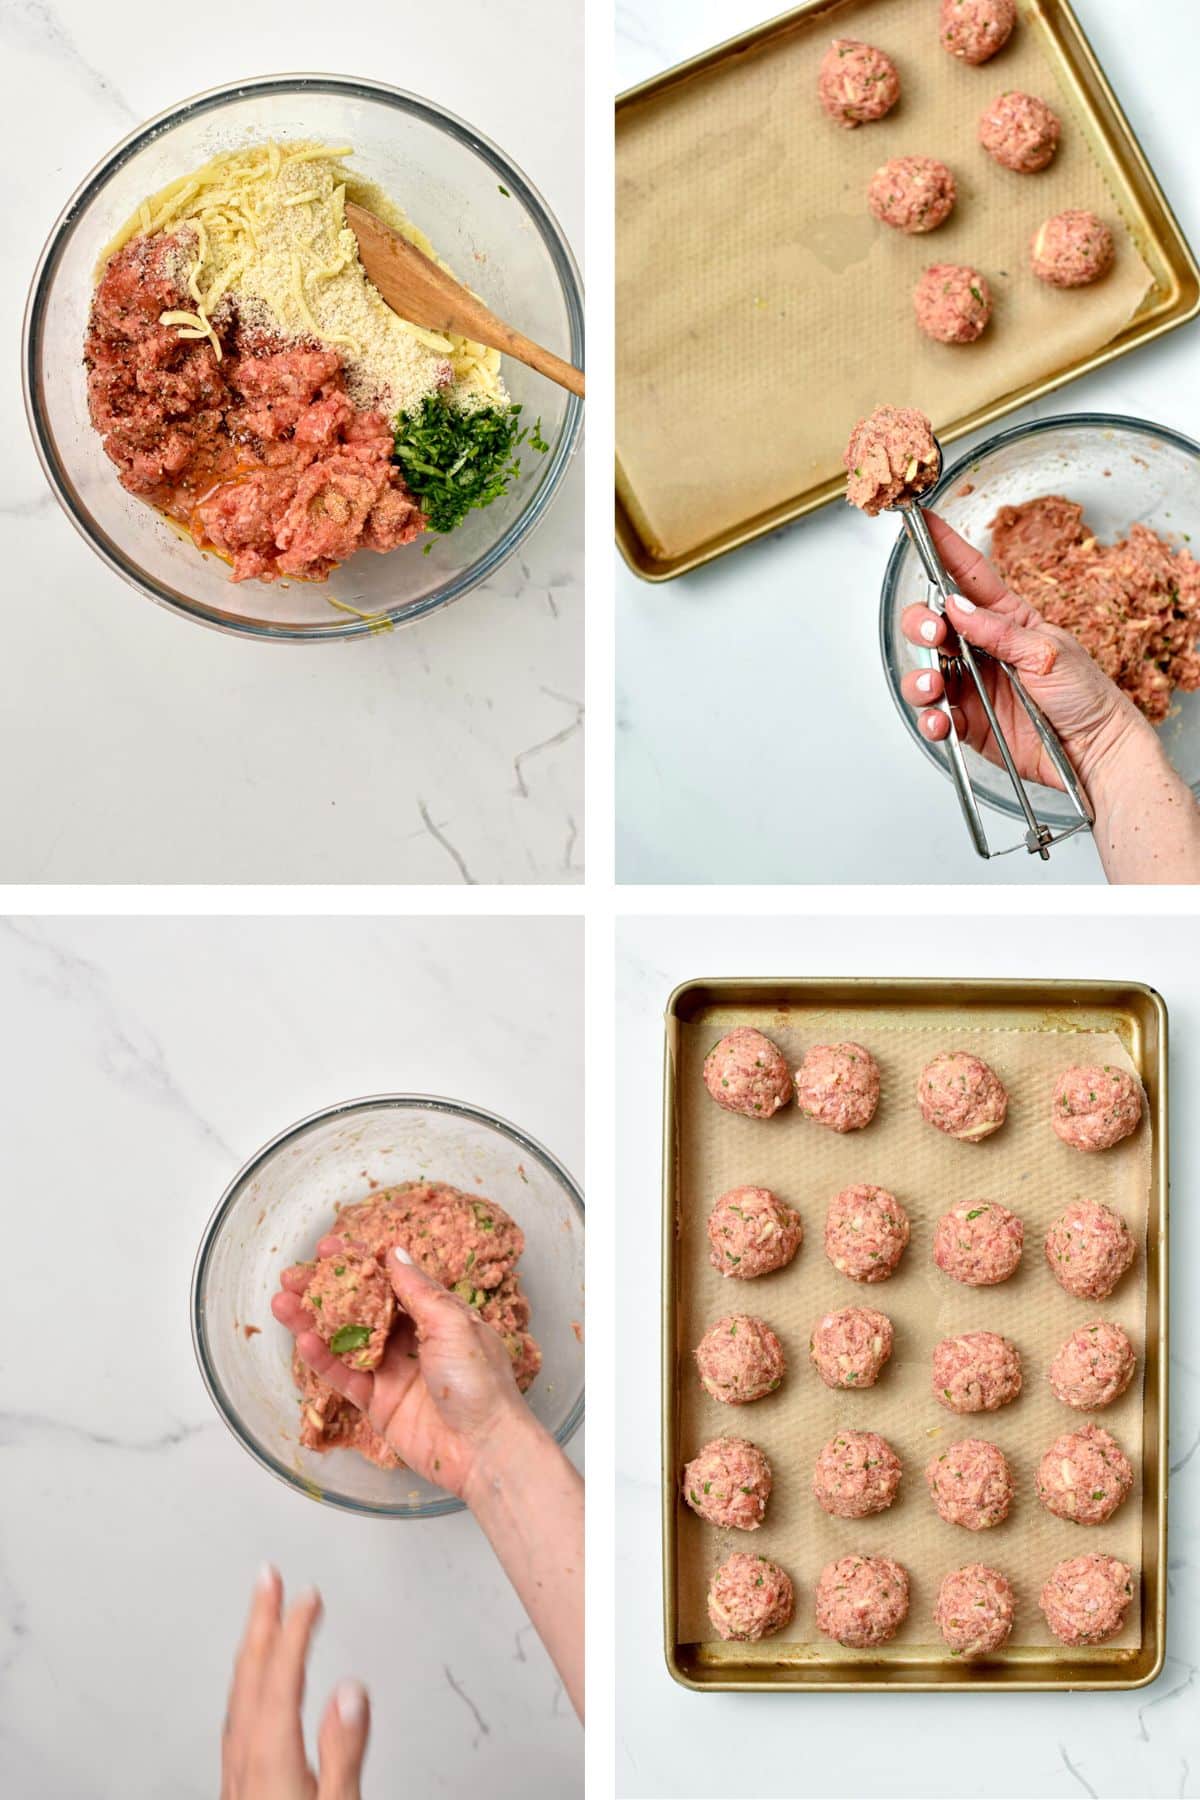 How to make Gluten Free Meatballs